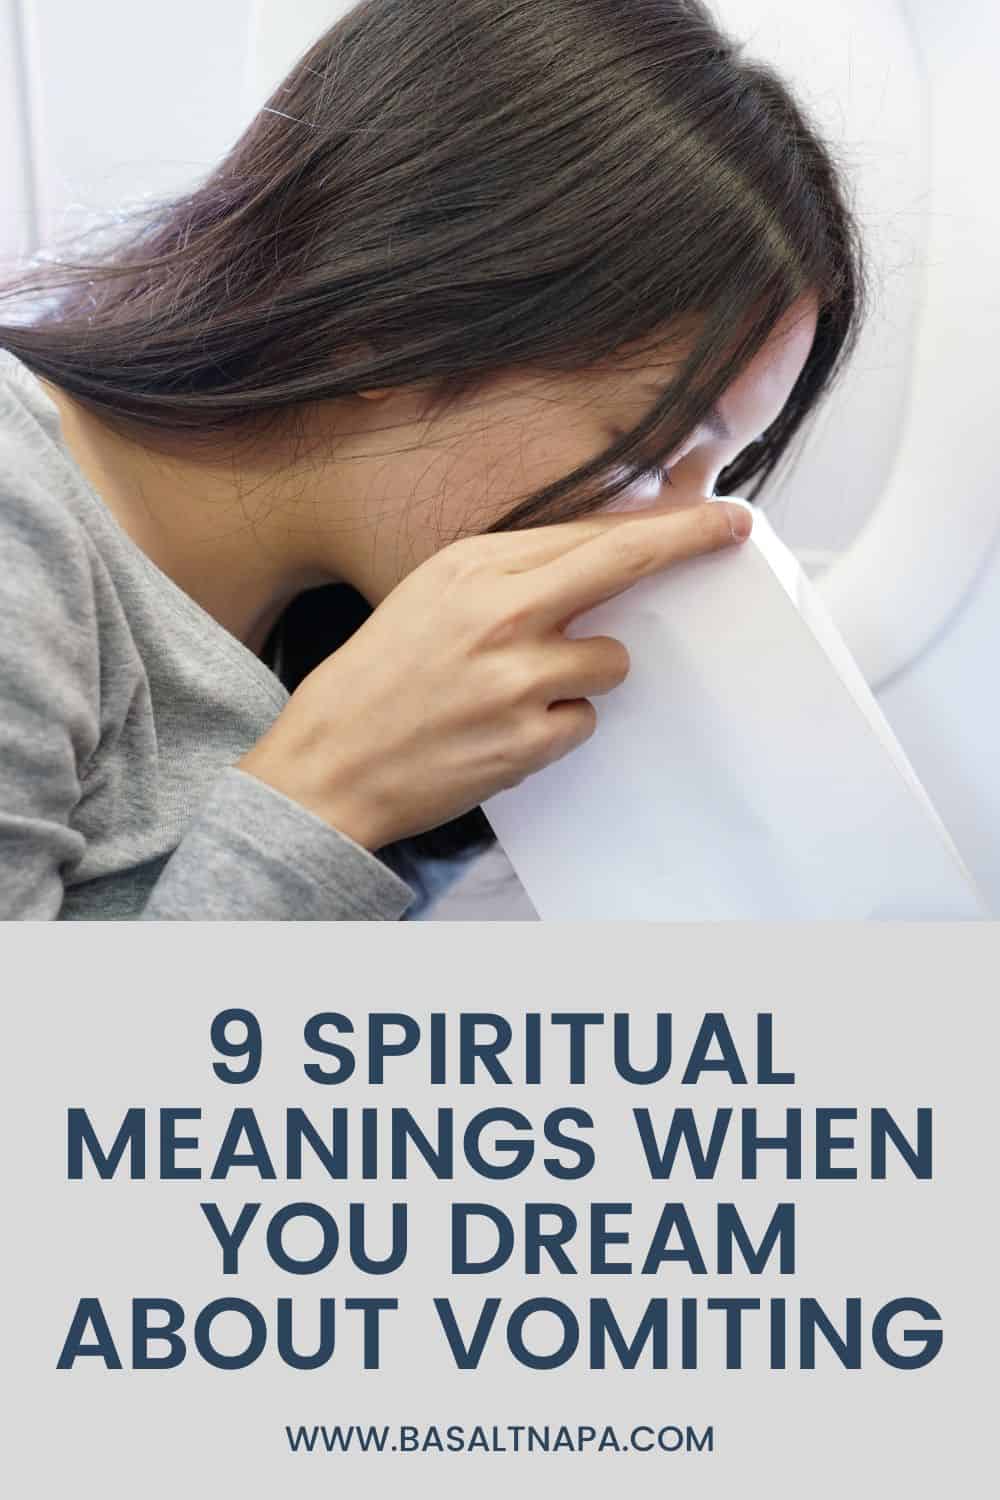 9 Spiritual Meanings When You Dream About Vomiting